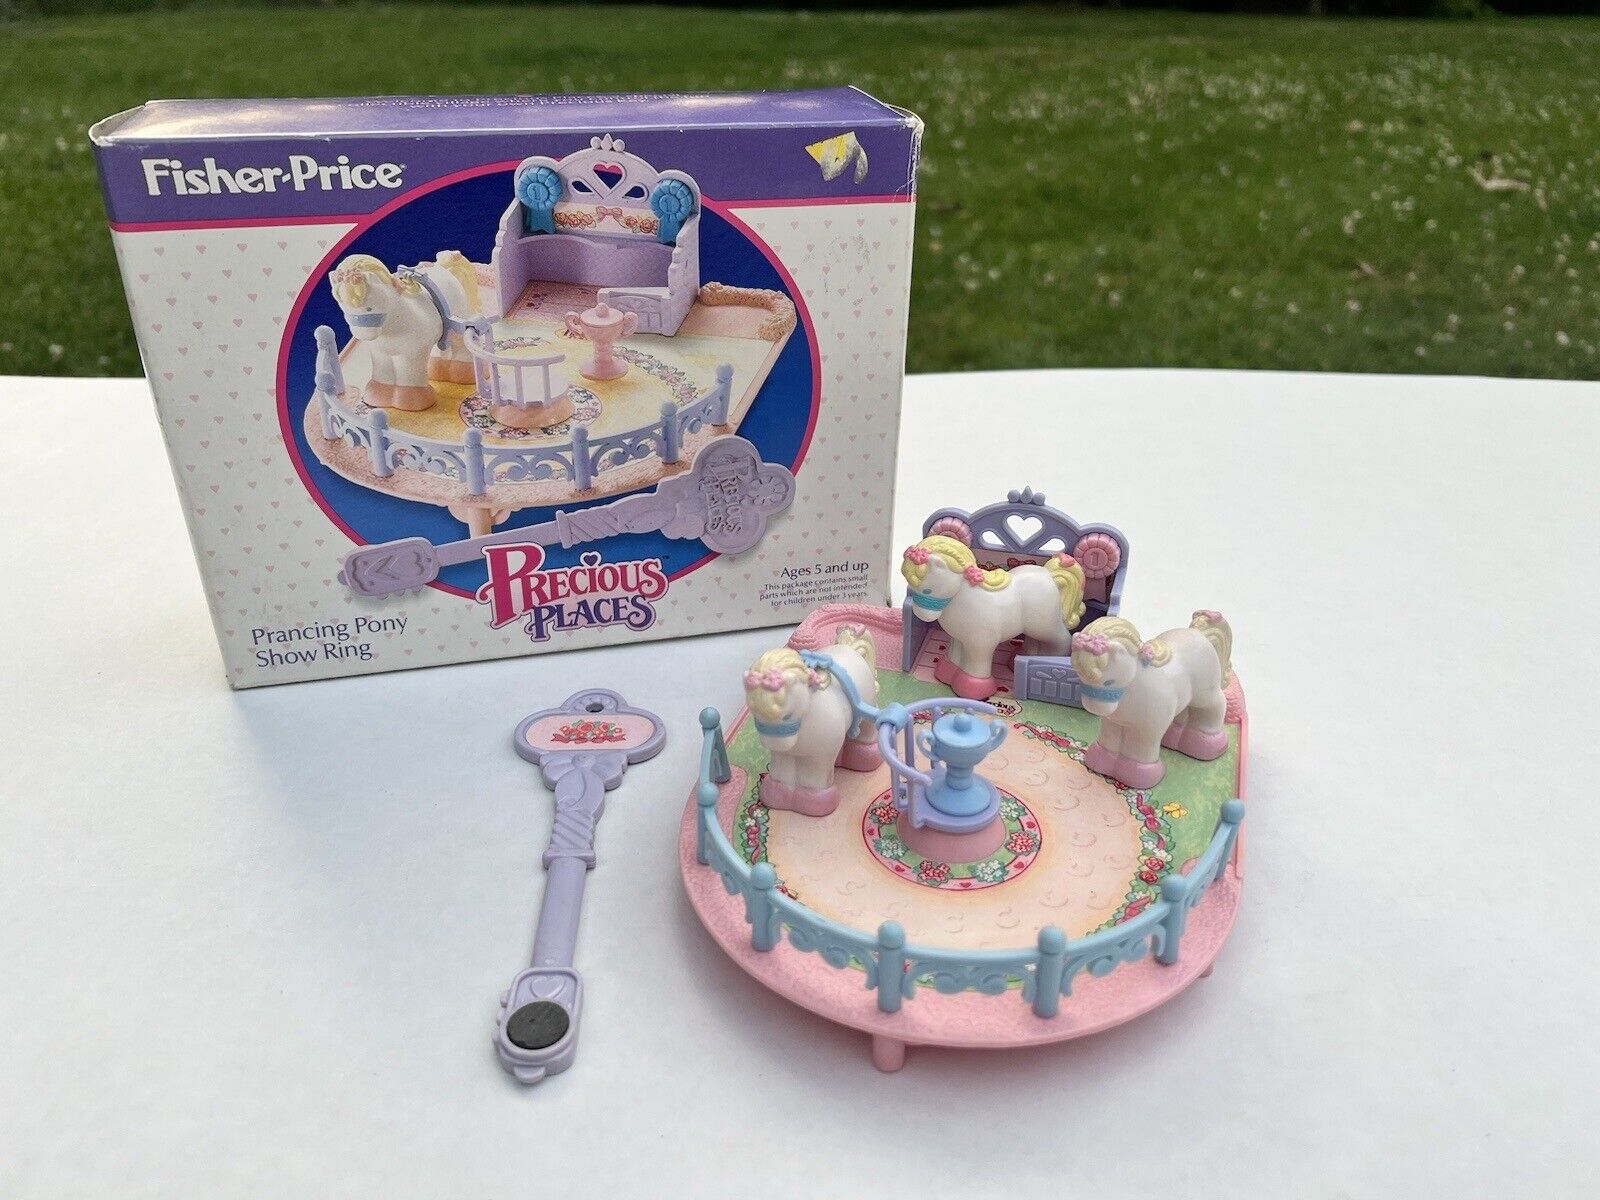 Fisher Price Precious Places Prancing Pony Show Ring #5189 1988 COMPLETE